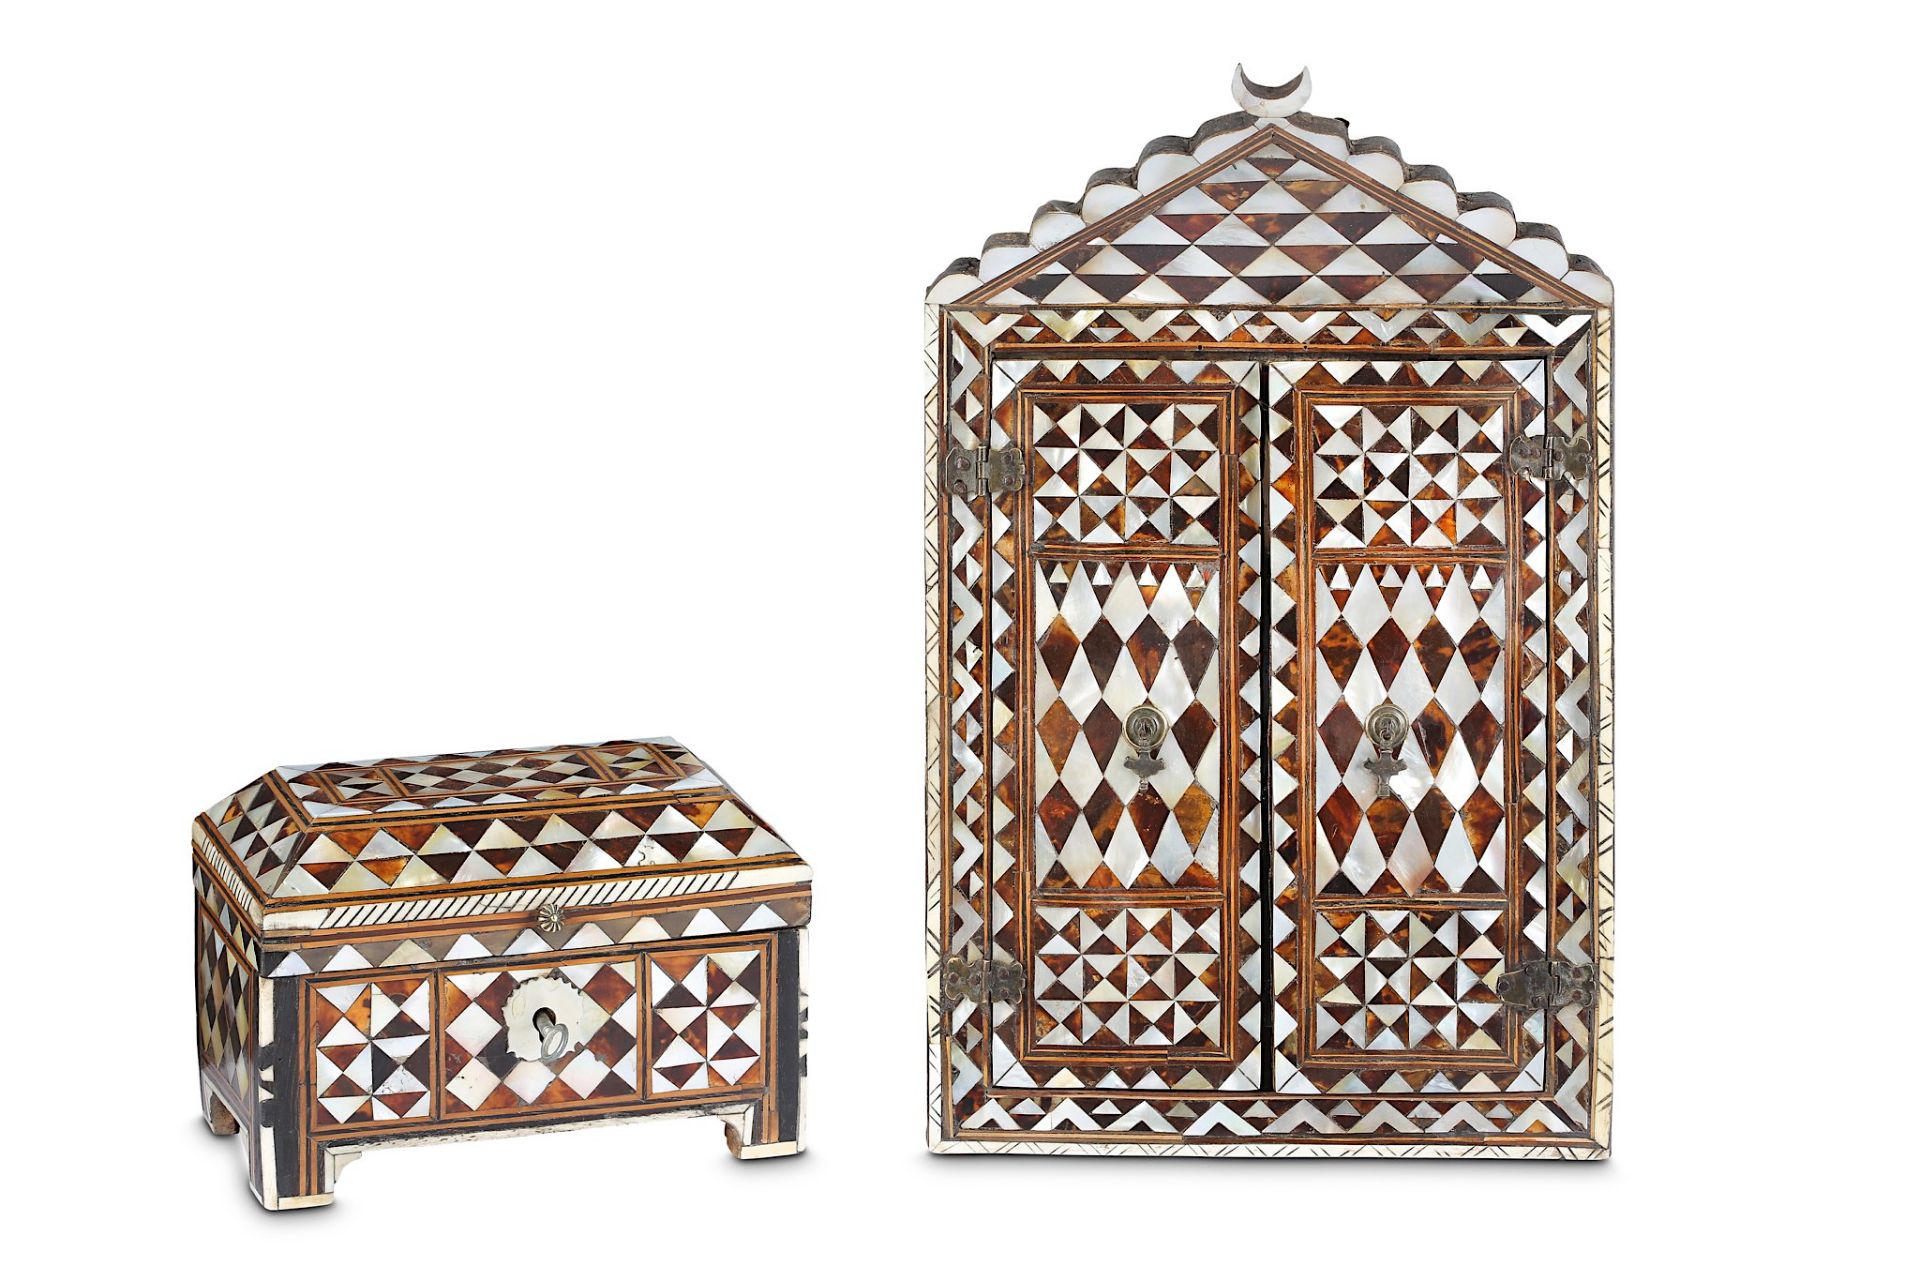 AN OTTOMAN MOTHER-OF-PEARL AND TORTOISE SHELL-INLA